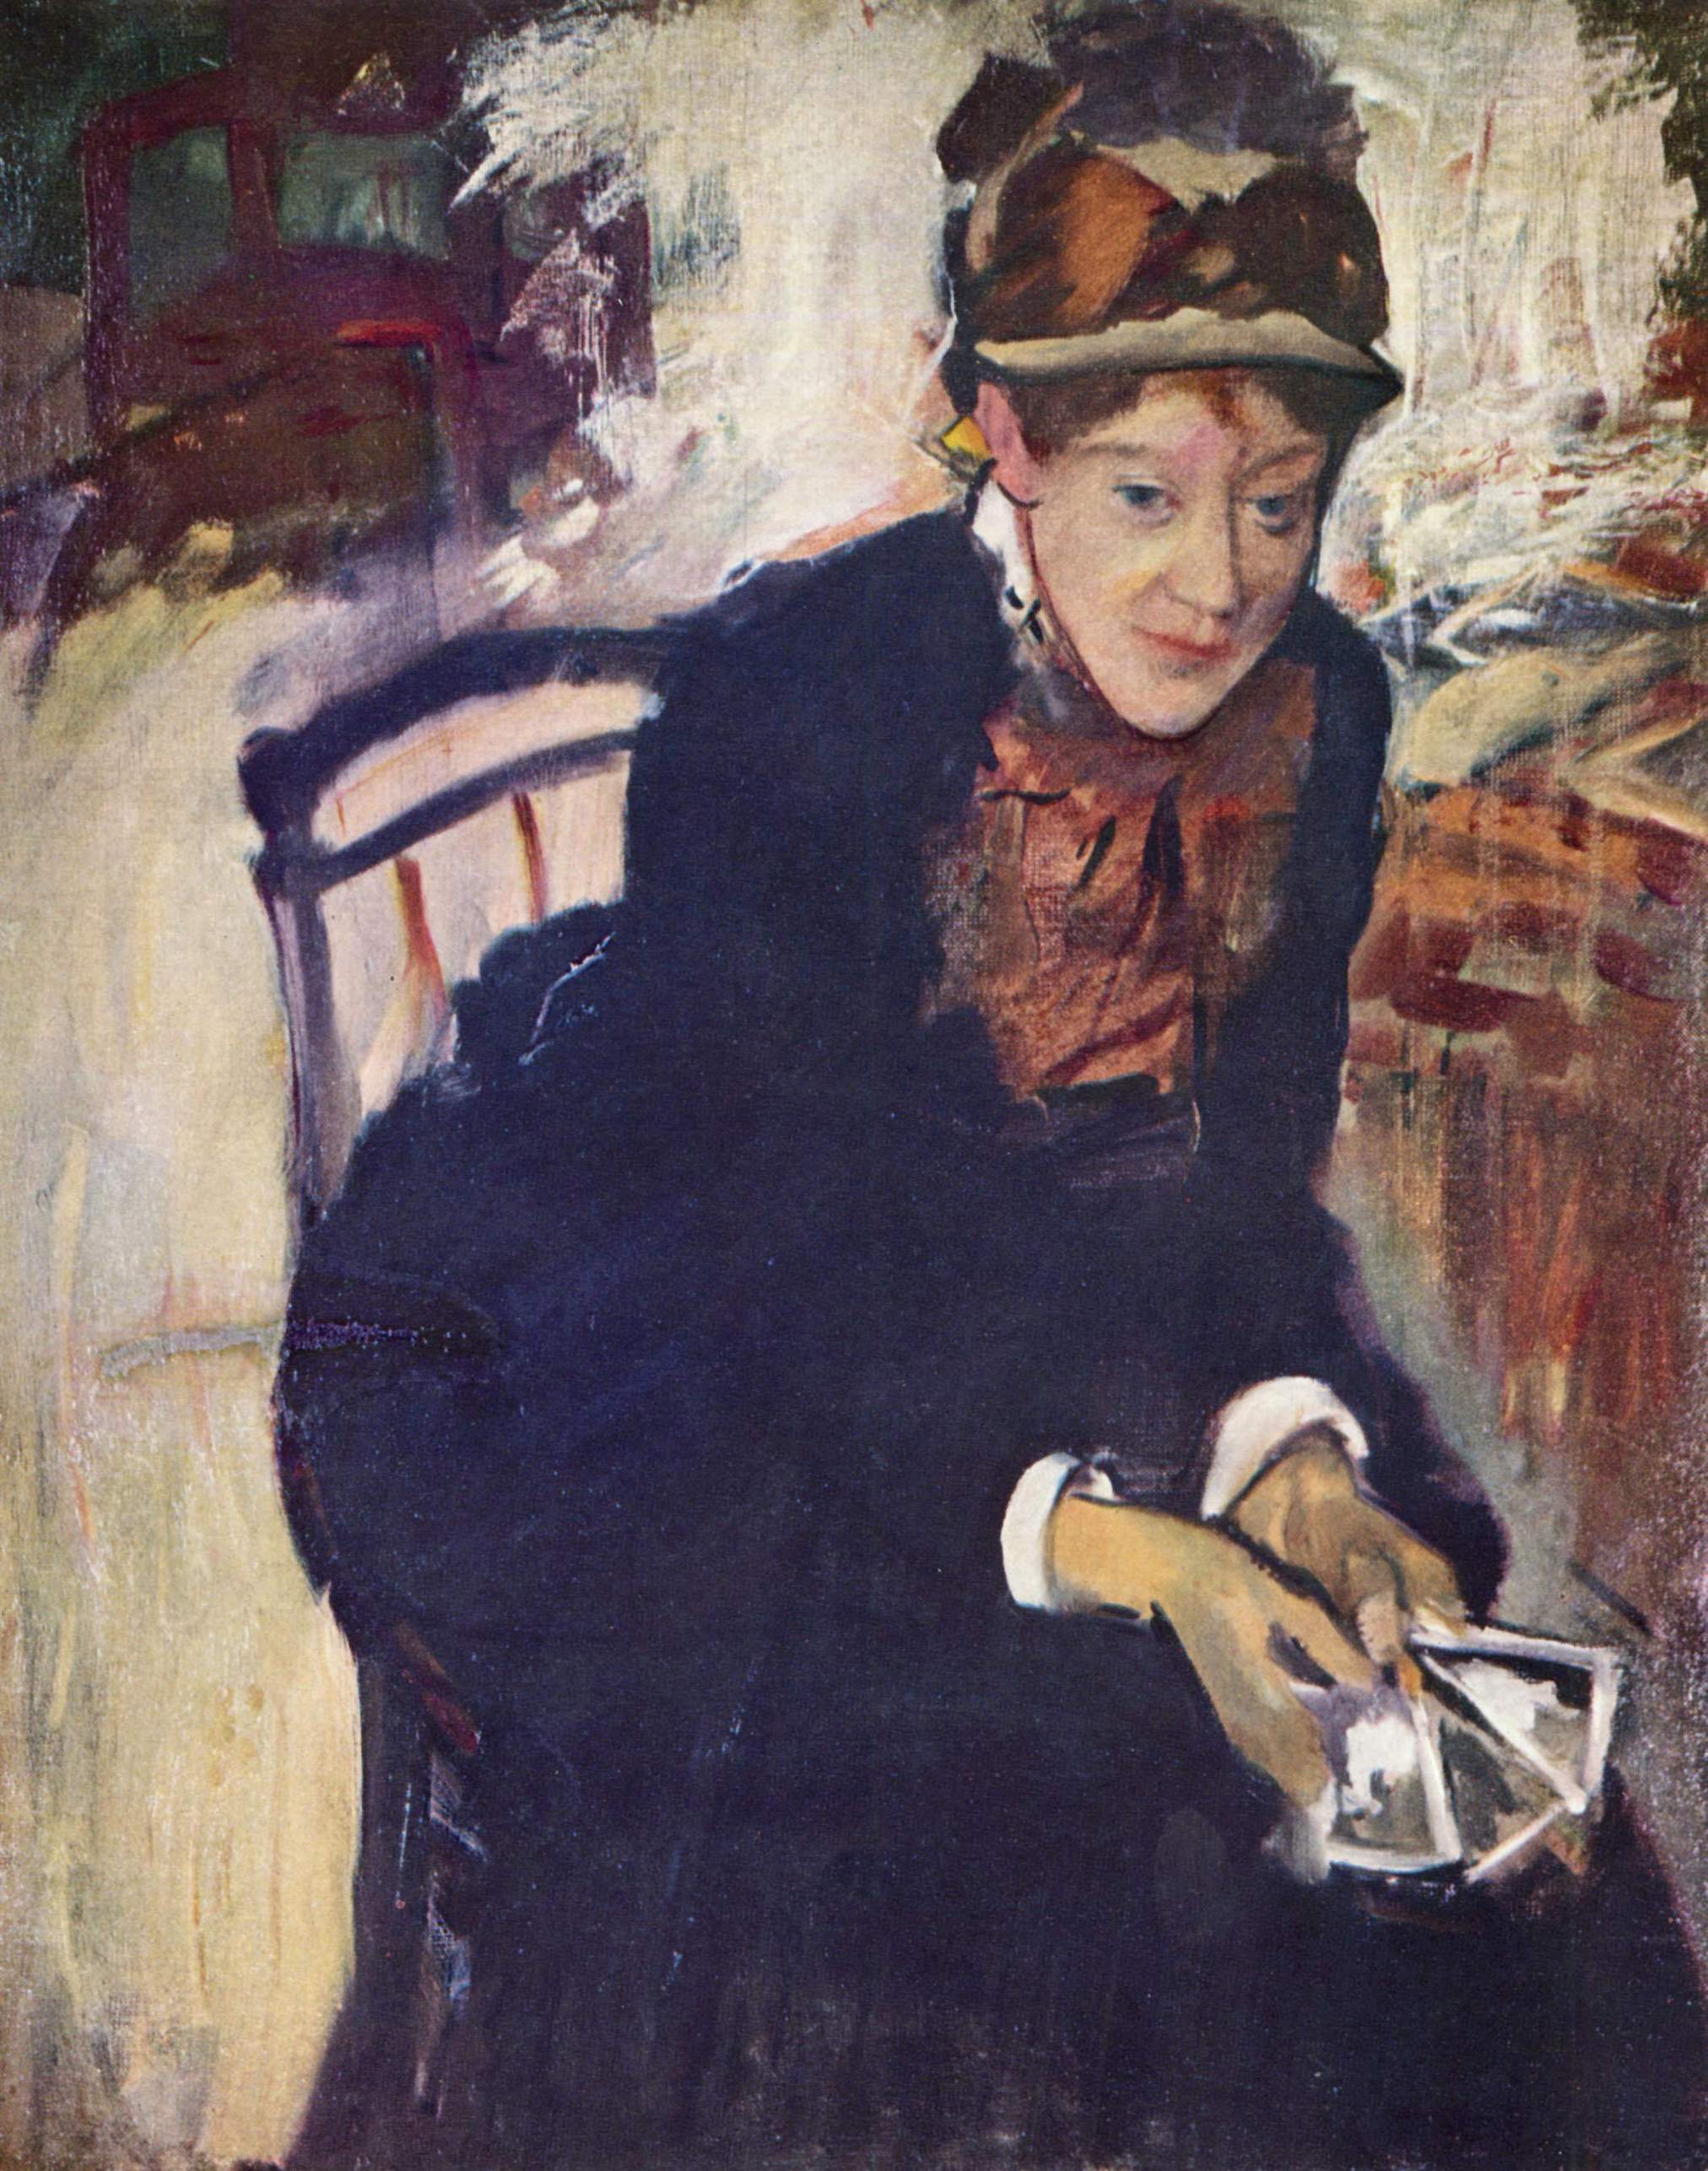 Portrait of Miss Cassatt, Seated, Holding Cards by Edgar Degas - circa 1876-1878 - 74 × 60 cm private collection